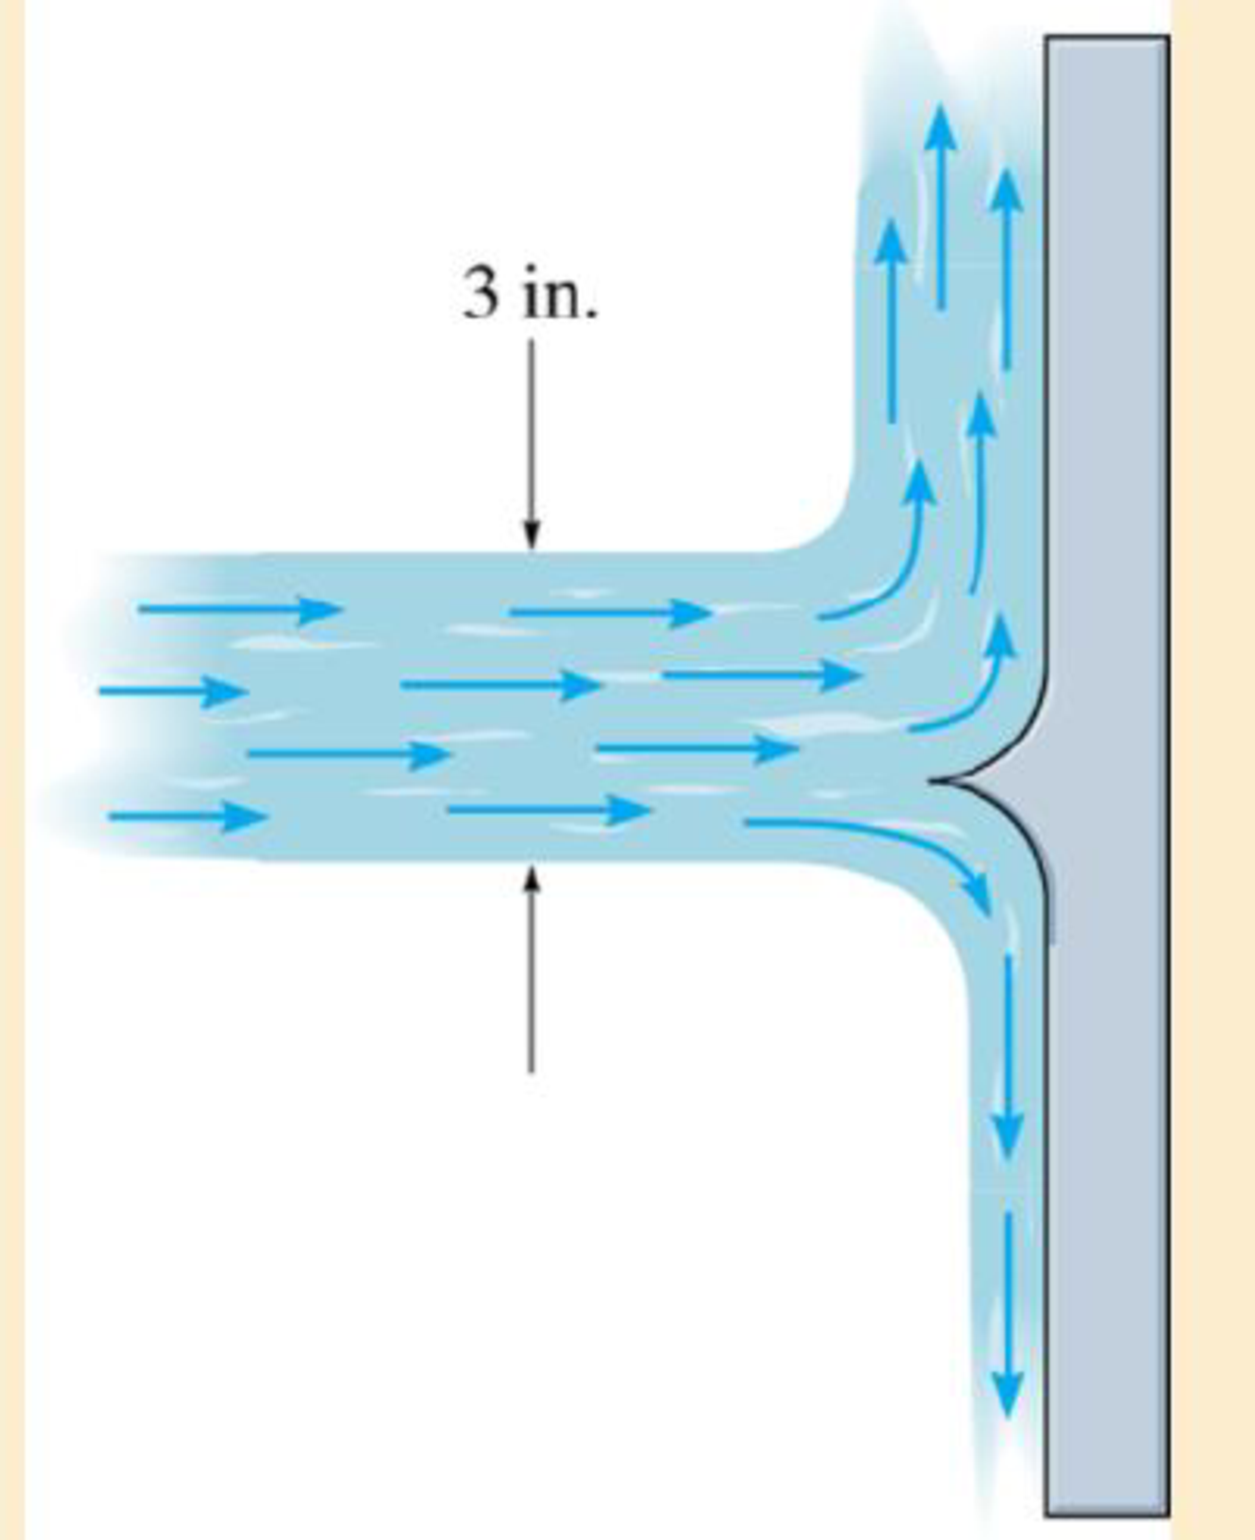 Chapter 15.9, Problem 119P, If one-fourth of the water flows downward while the other three-fourths flows upward, and the total 